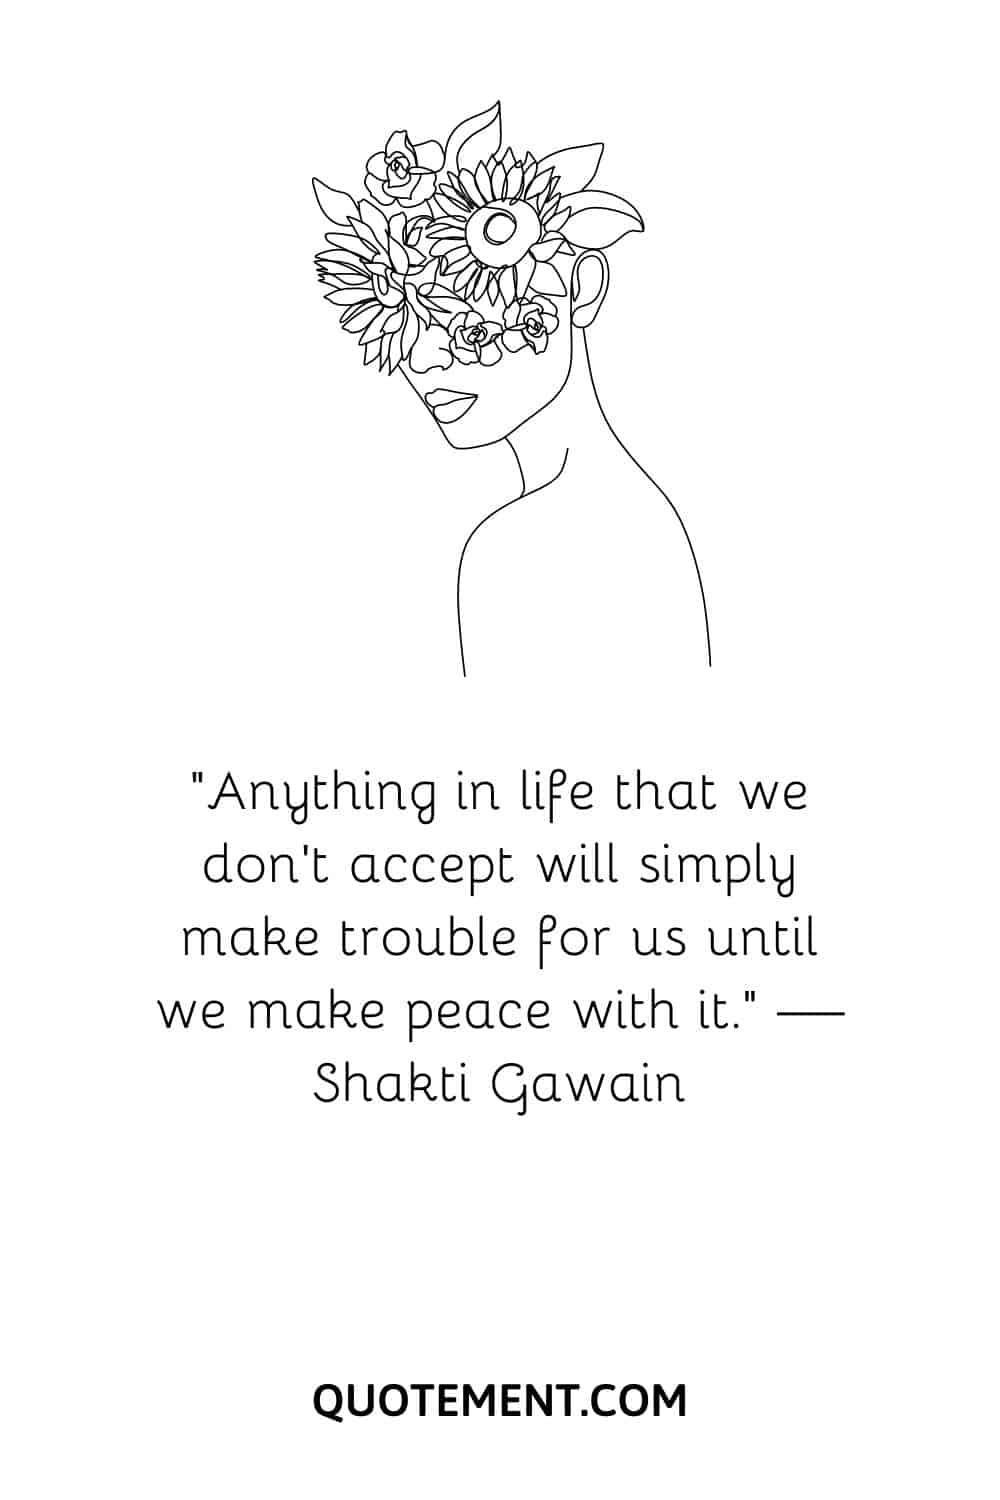 “Anything in life that we don’t accept will simply make trouble for us until we make peace with it.” — Shakti Gawain